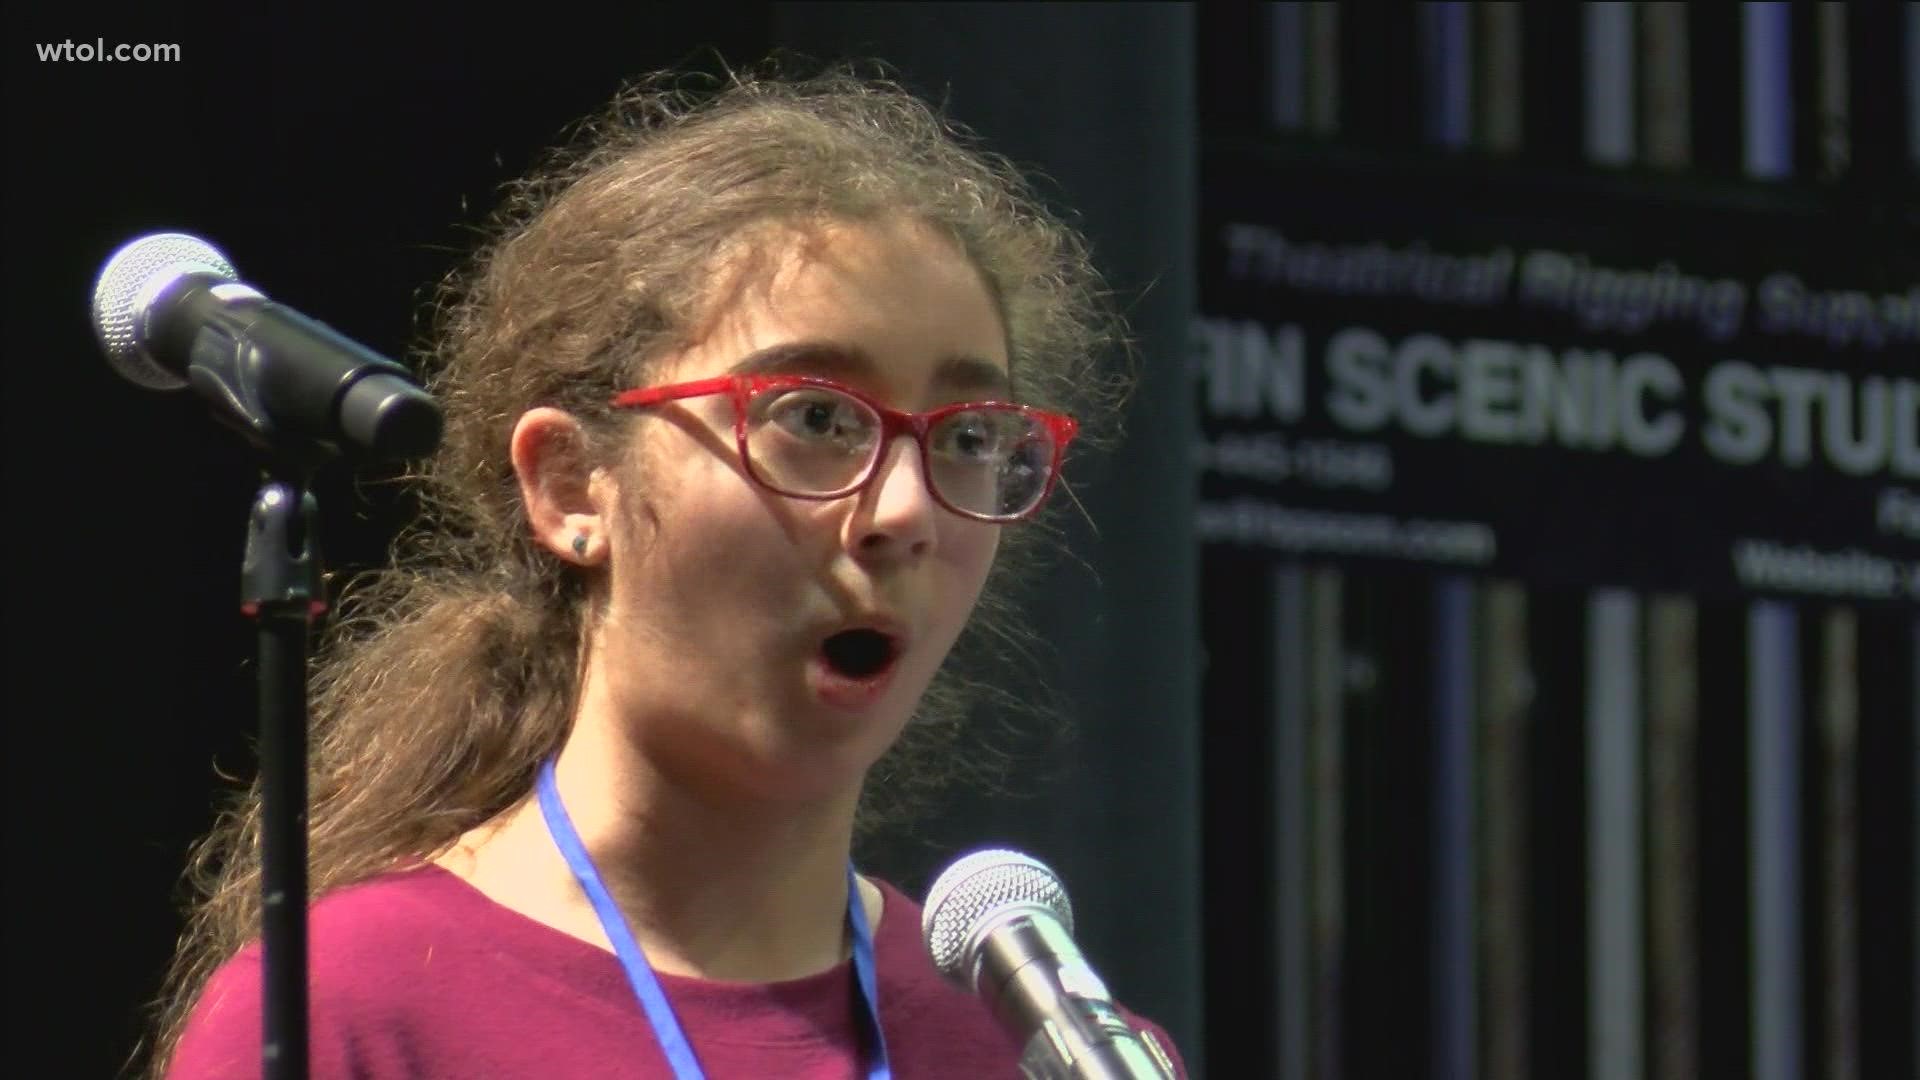 The winning speller from Van Wert County spelled the word 'quotidian' correctly to take home the prize.